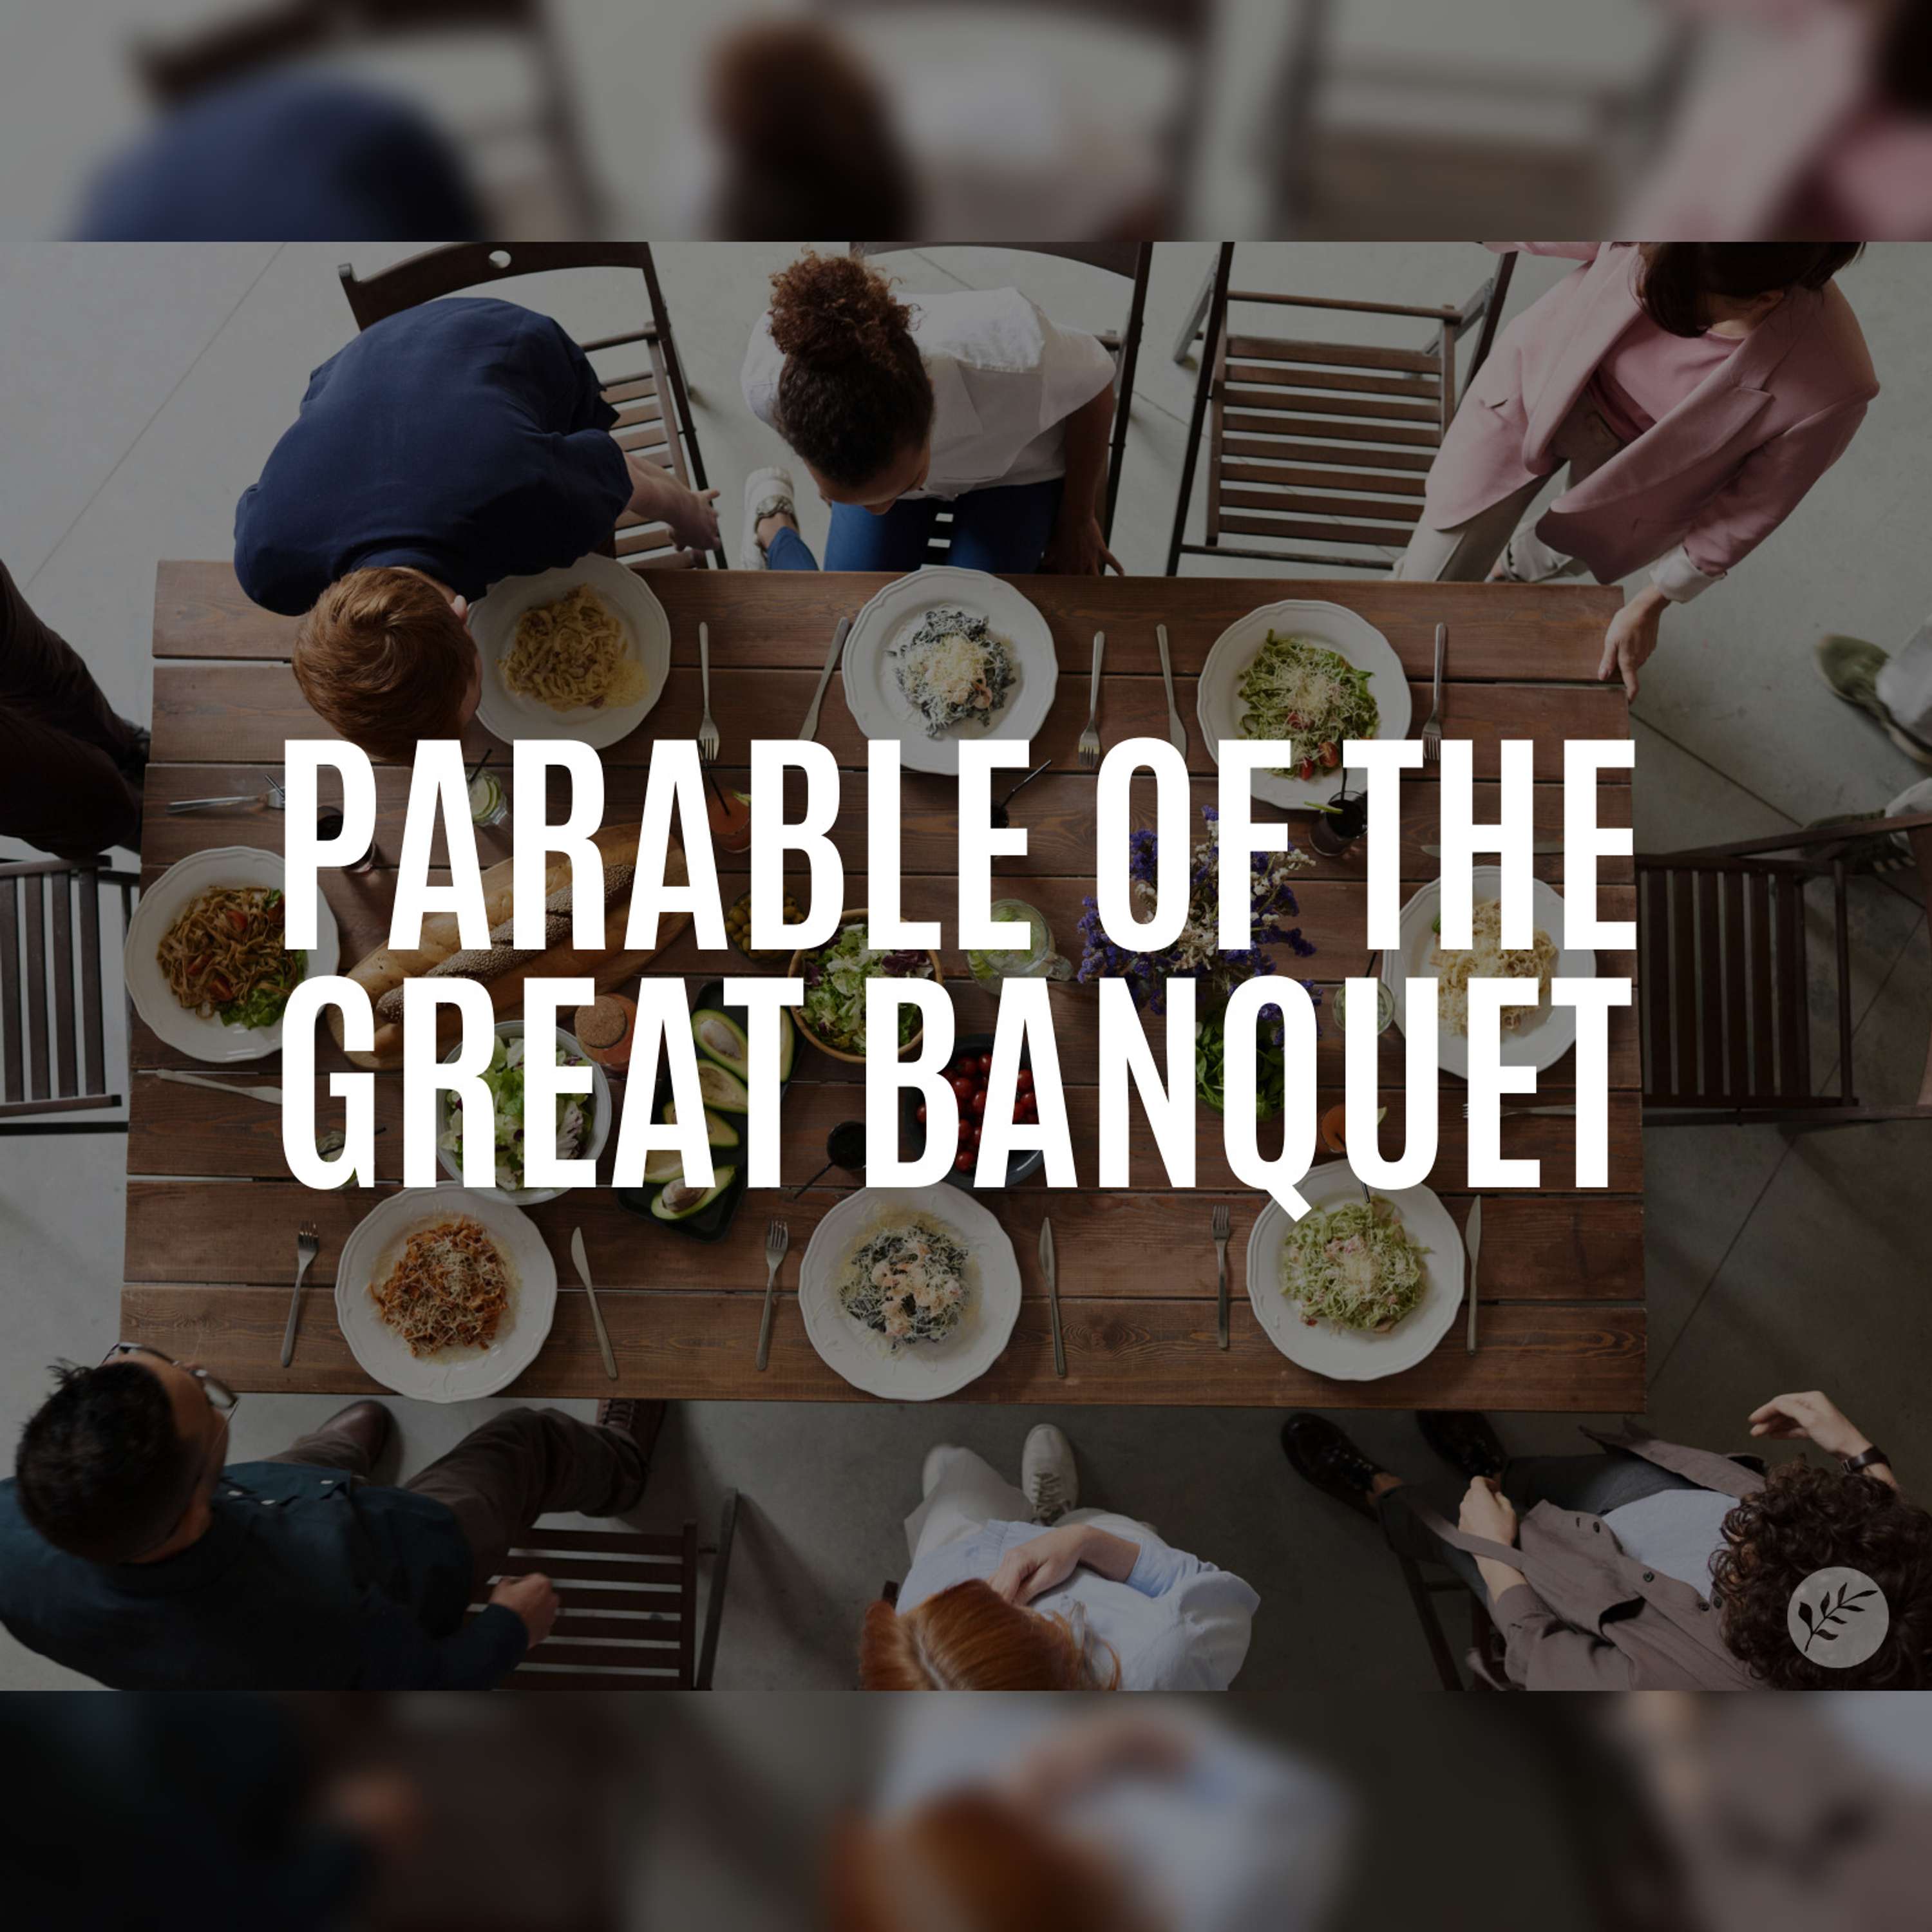 The Parable of the Great Banquet | Luke 14:12-24